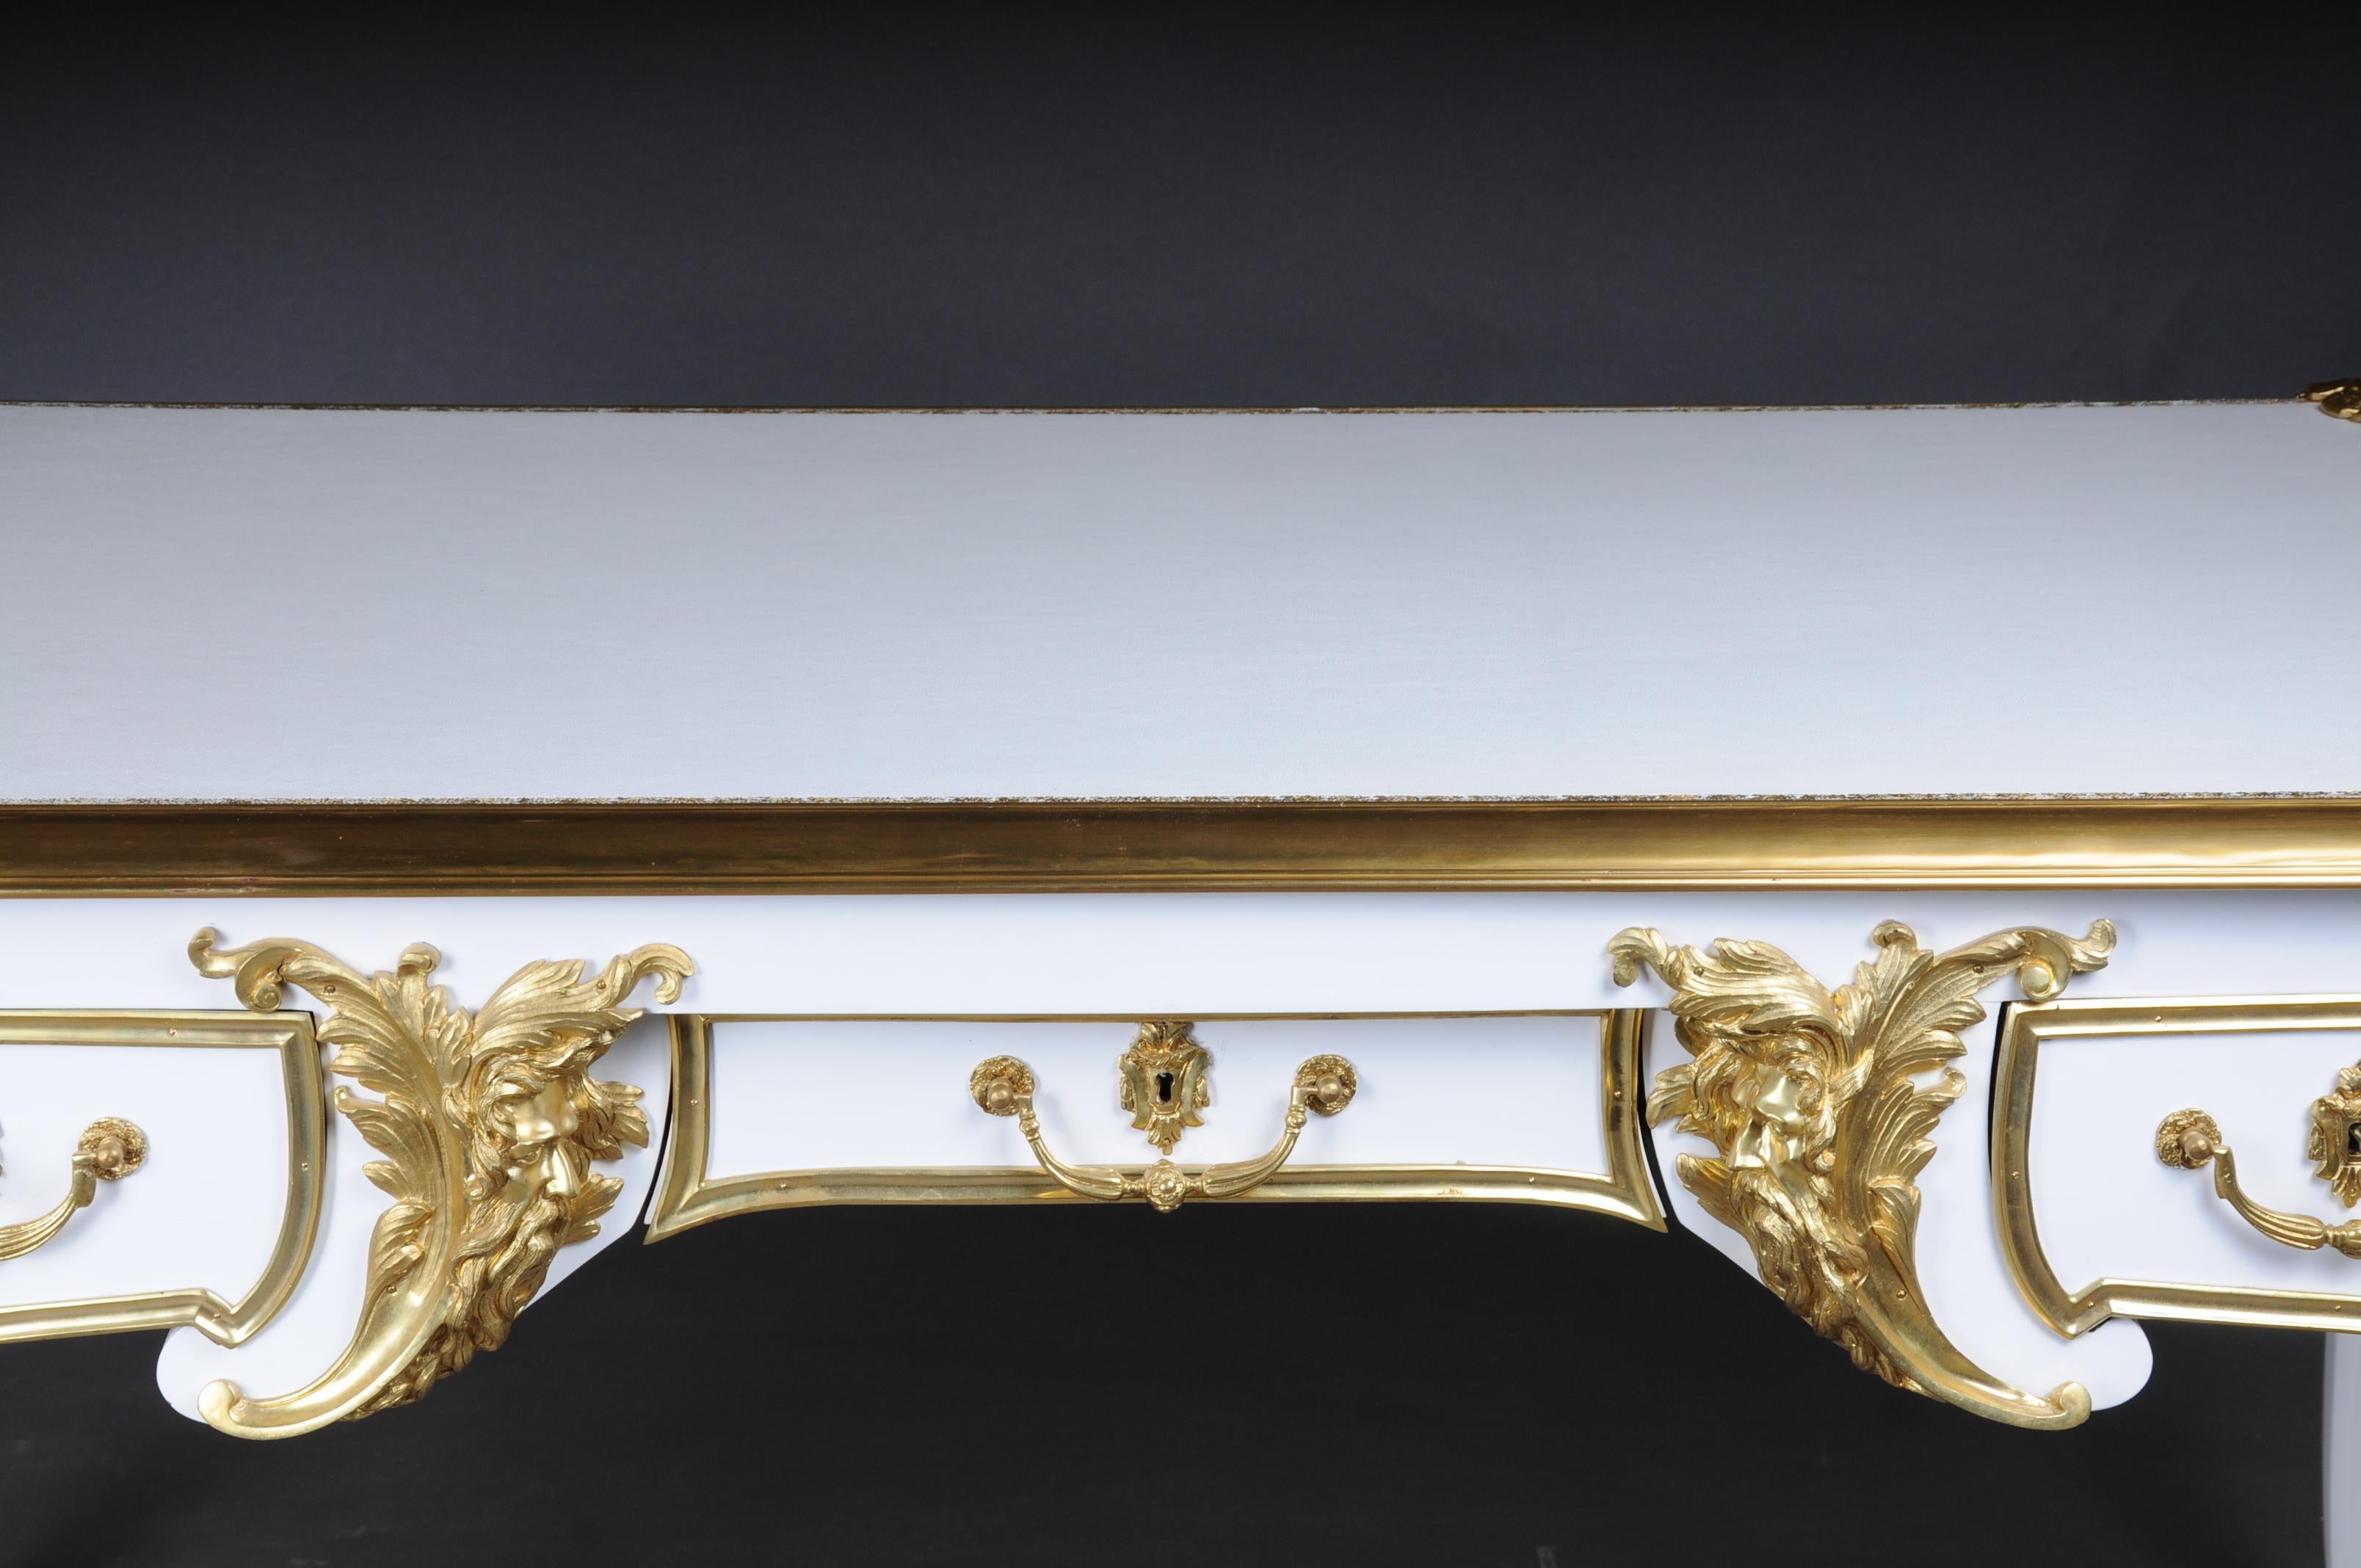 20th Century Bureau Plat/Desk high gloss white with gold after C. Boulle

This model was built by Charles Boulle, the most important and historian of Louis XV.
Piano white Polished veneer on solid beech and oak. Extremely finely chiselled bronze.